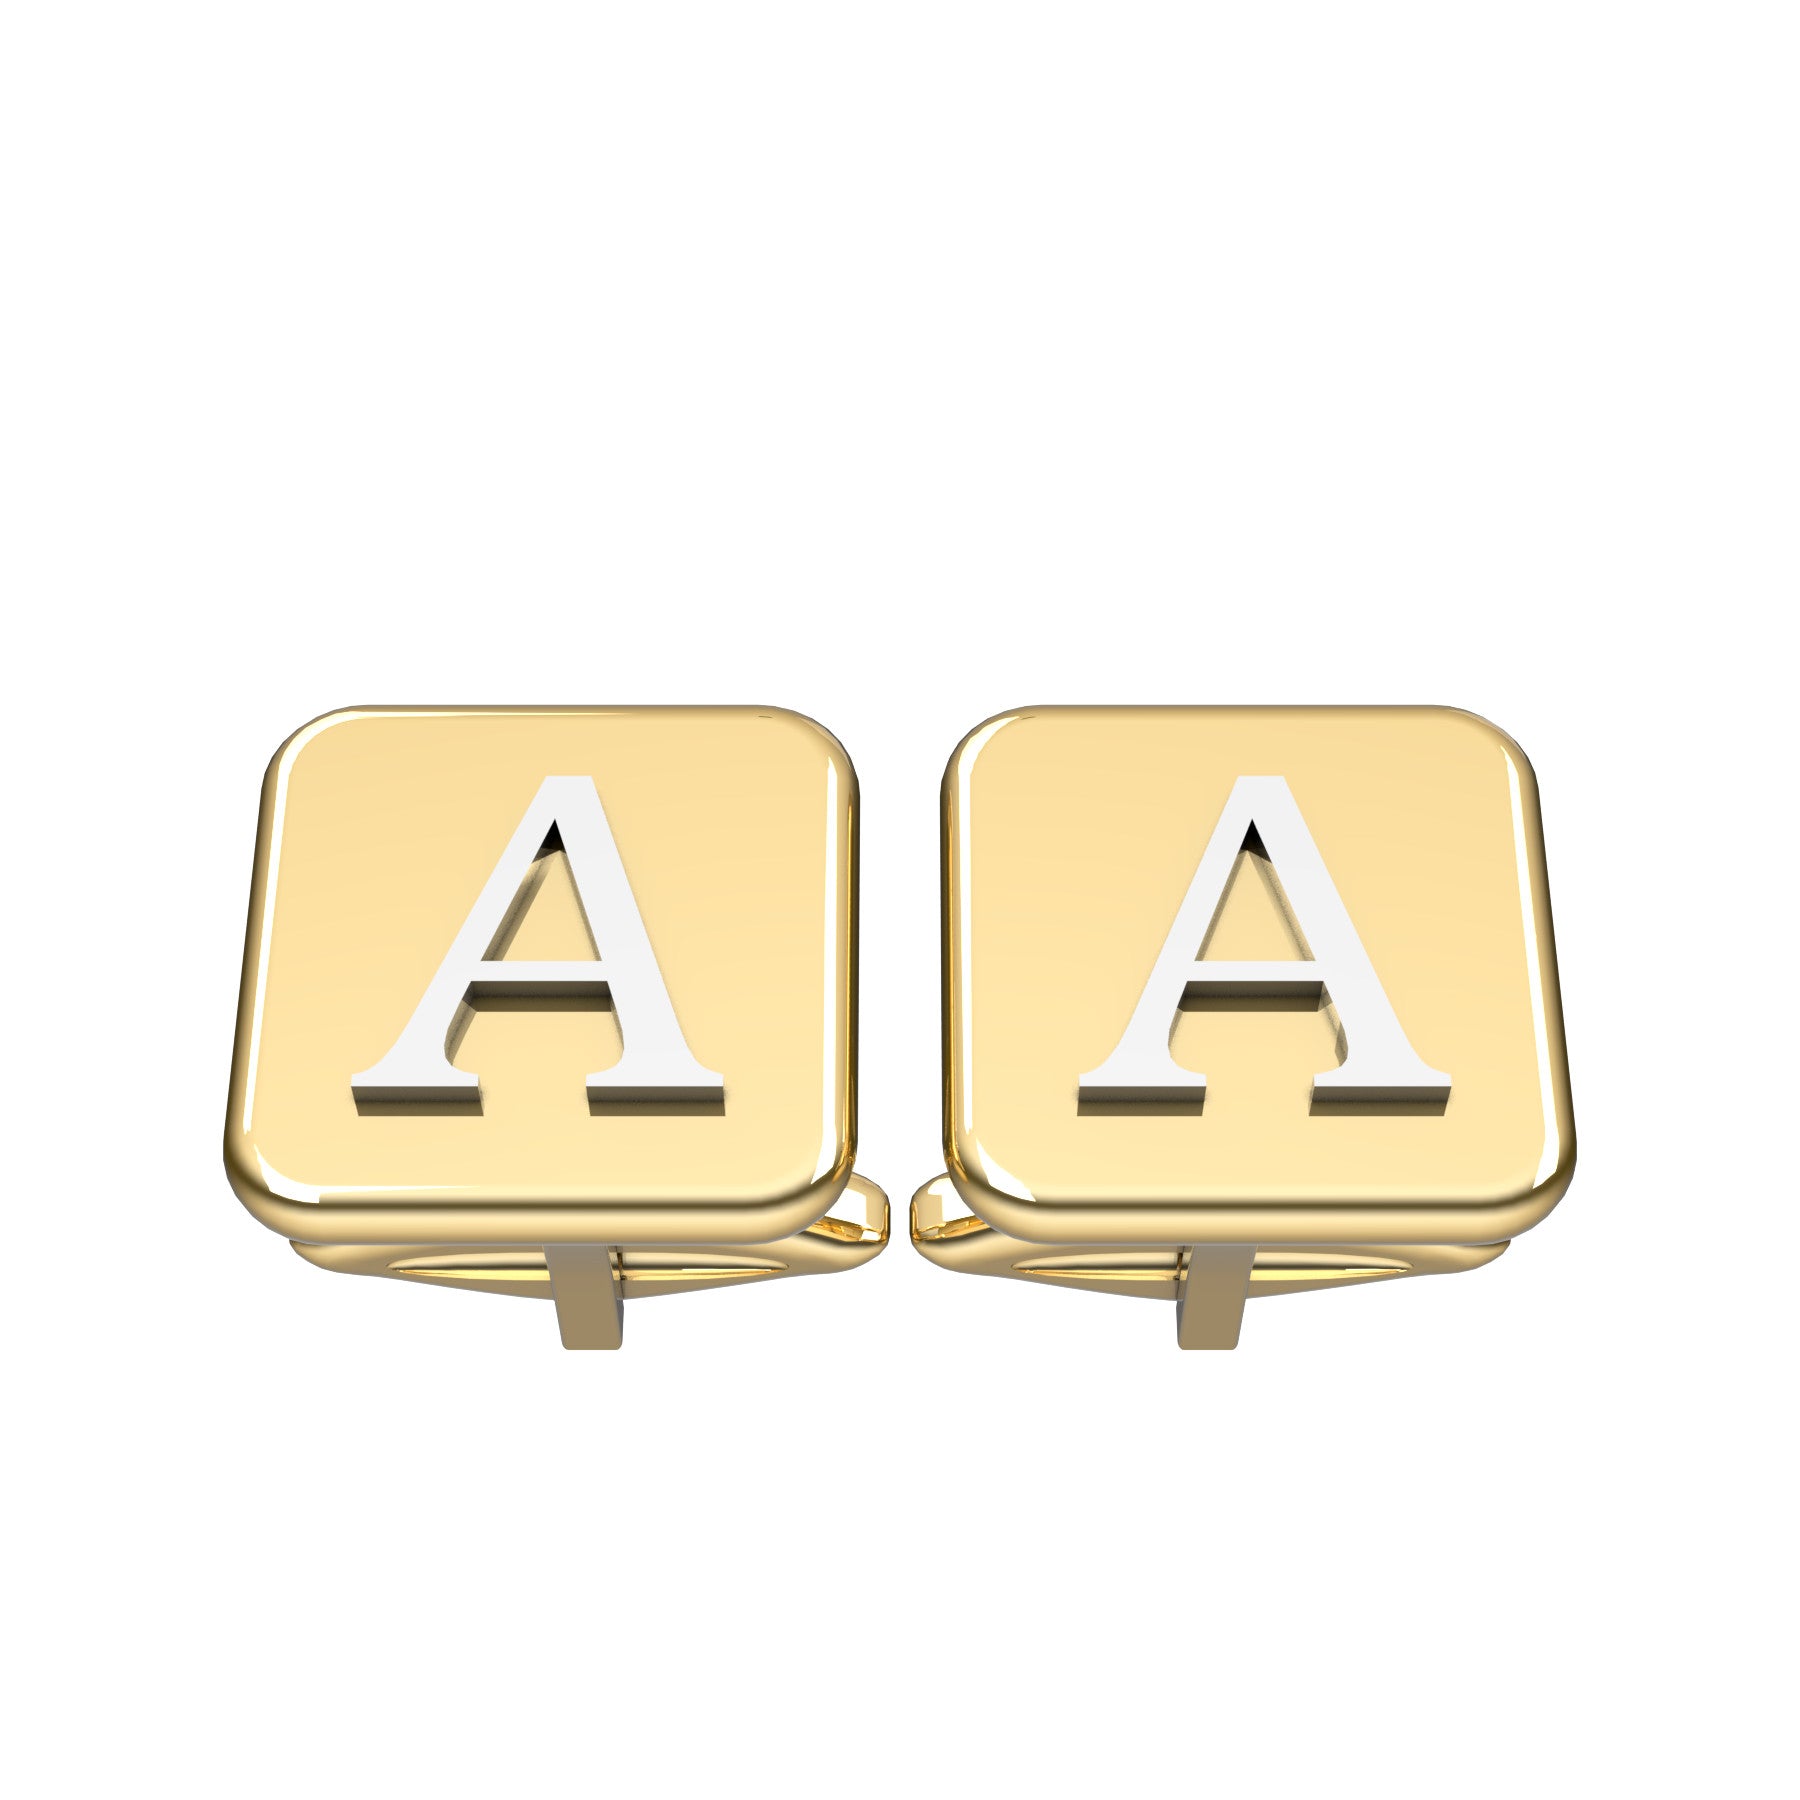 rounded square cufflinks, 18 K yellow and white gold, weight about 15,2 g (0.54 oz) size 15x15x3 mm max